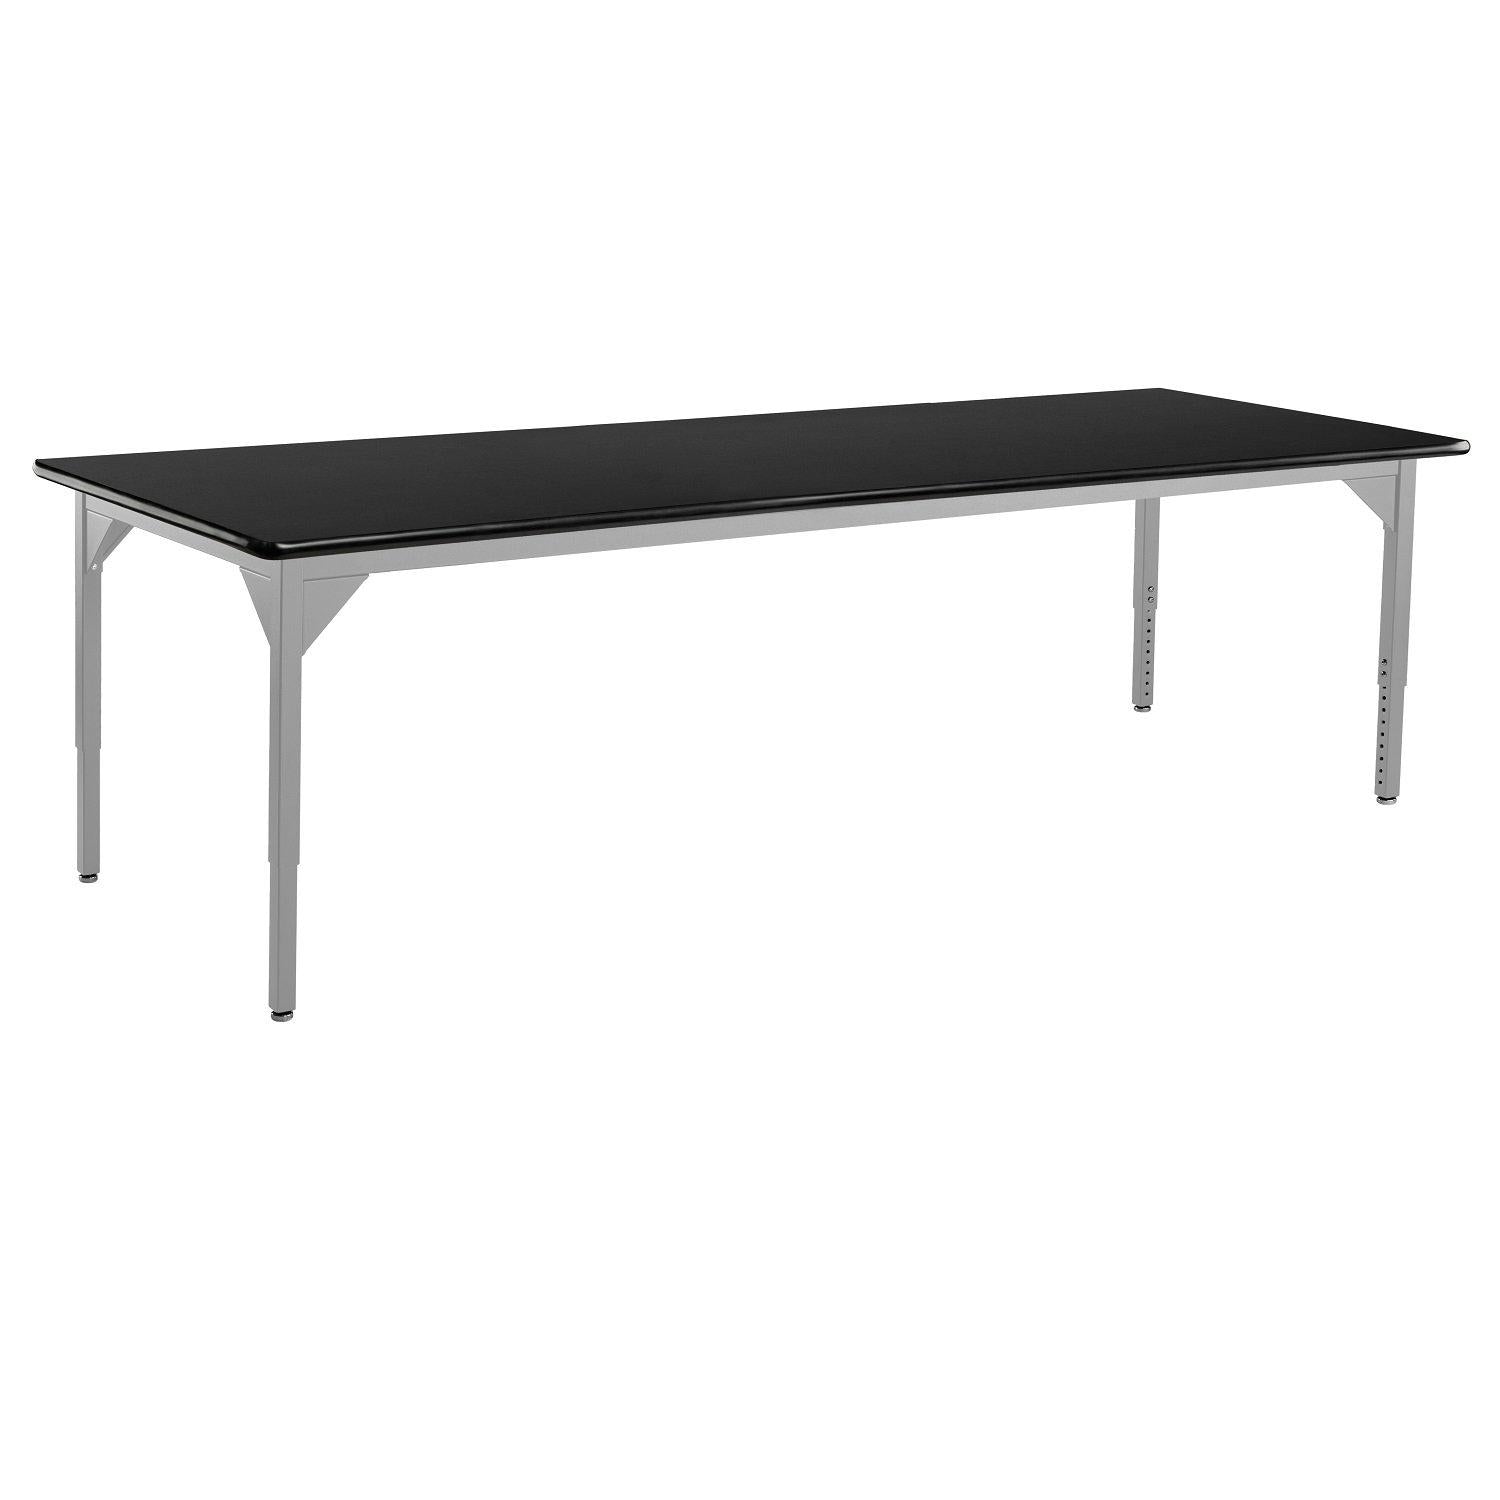 Heavy-Duty Height-Adjustable Utility Table, Soft Grey Frame, 48" x 96", High-Pressure Laminate Top with T-Mold Edge